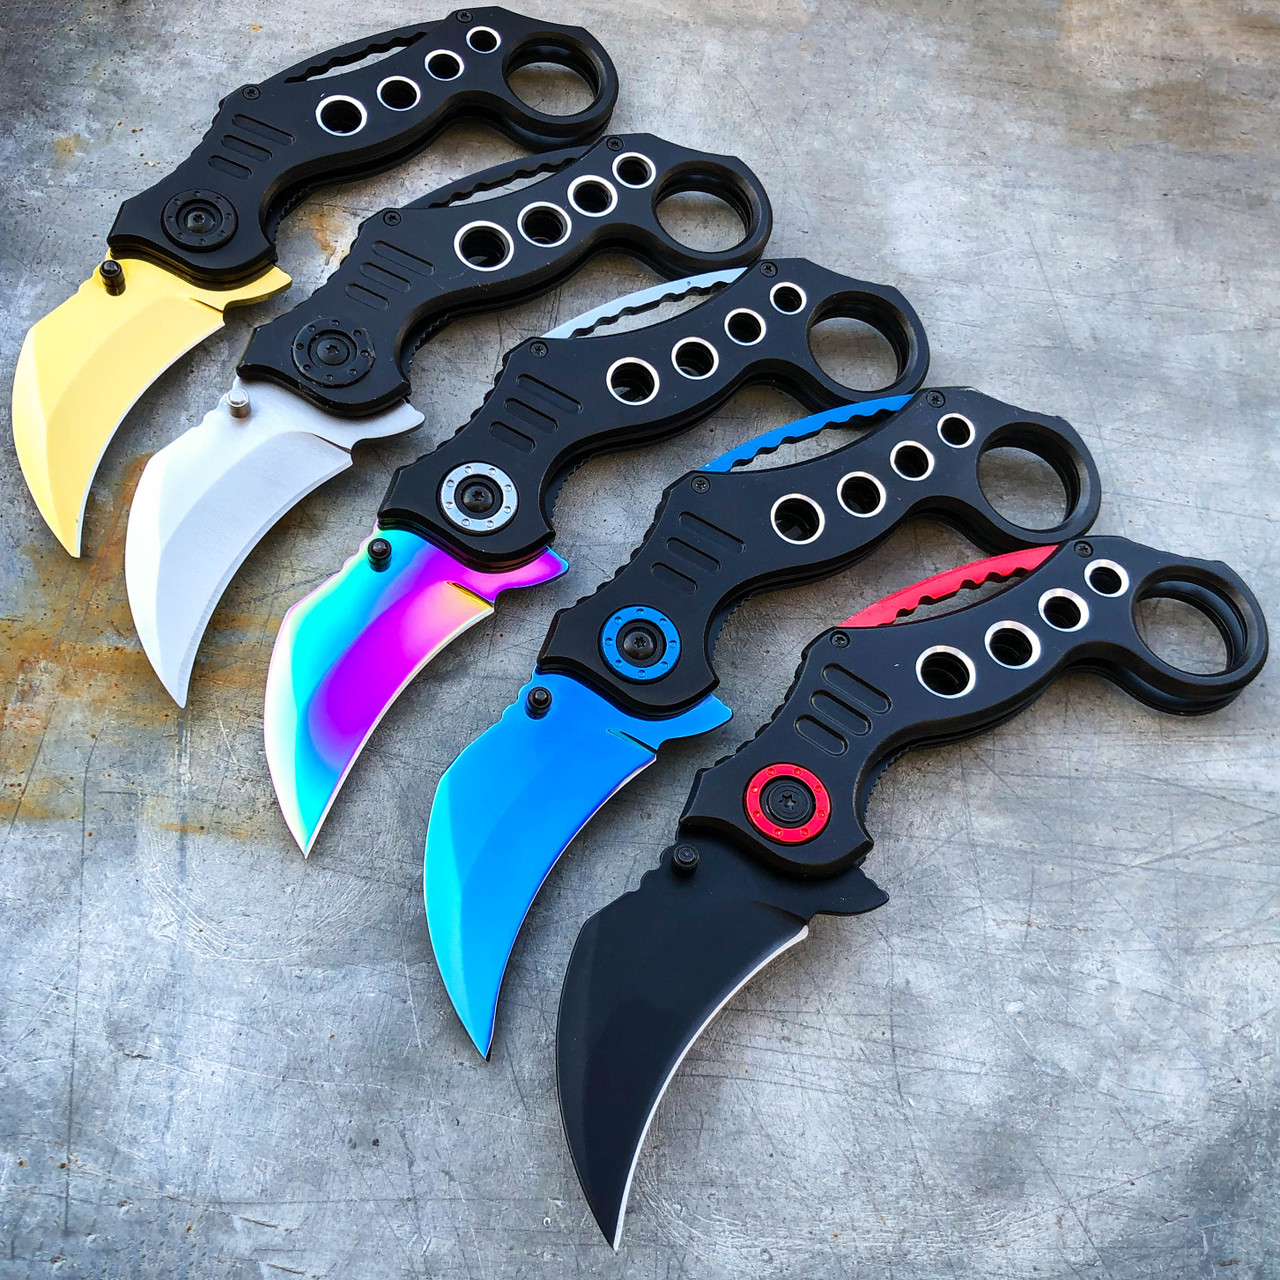 8 Military Karambit Claw Spring Assisted Camping Folding Open Pocket Knife  - MEGAKNIFE